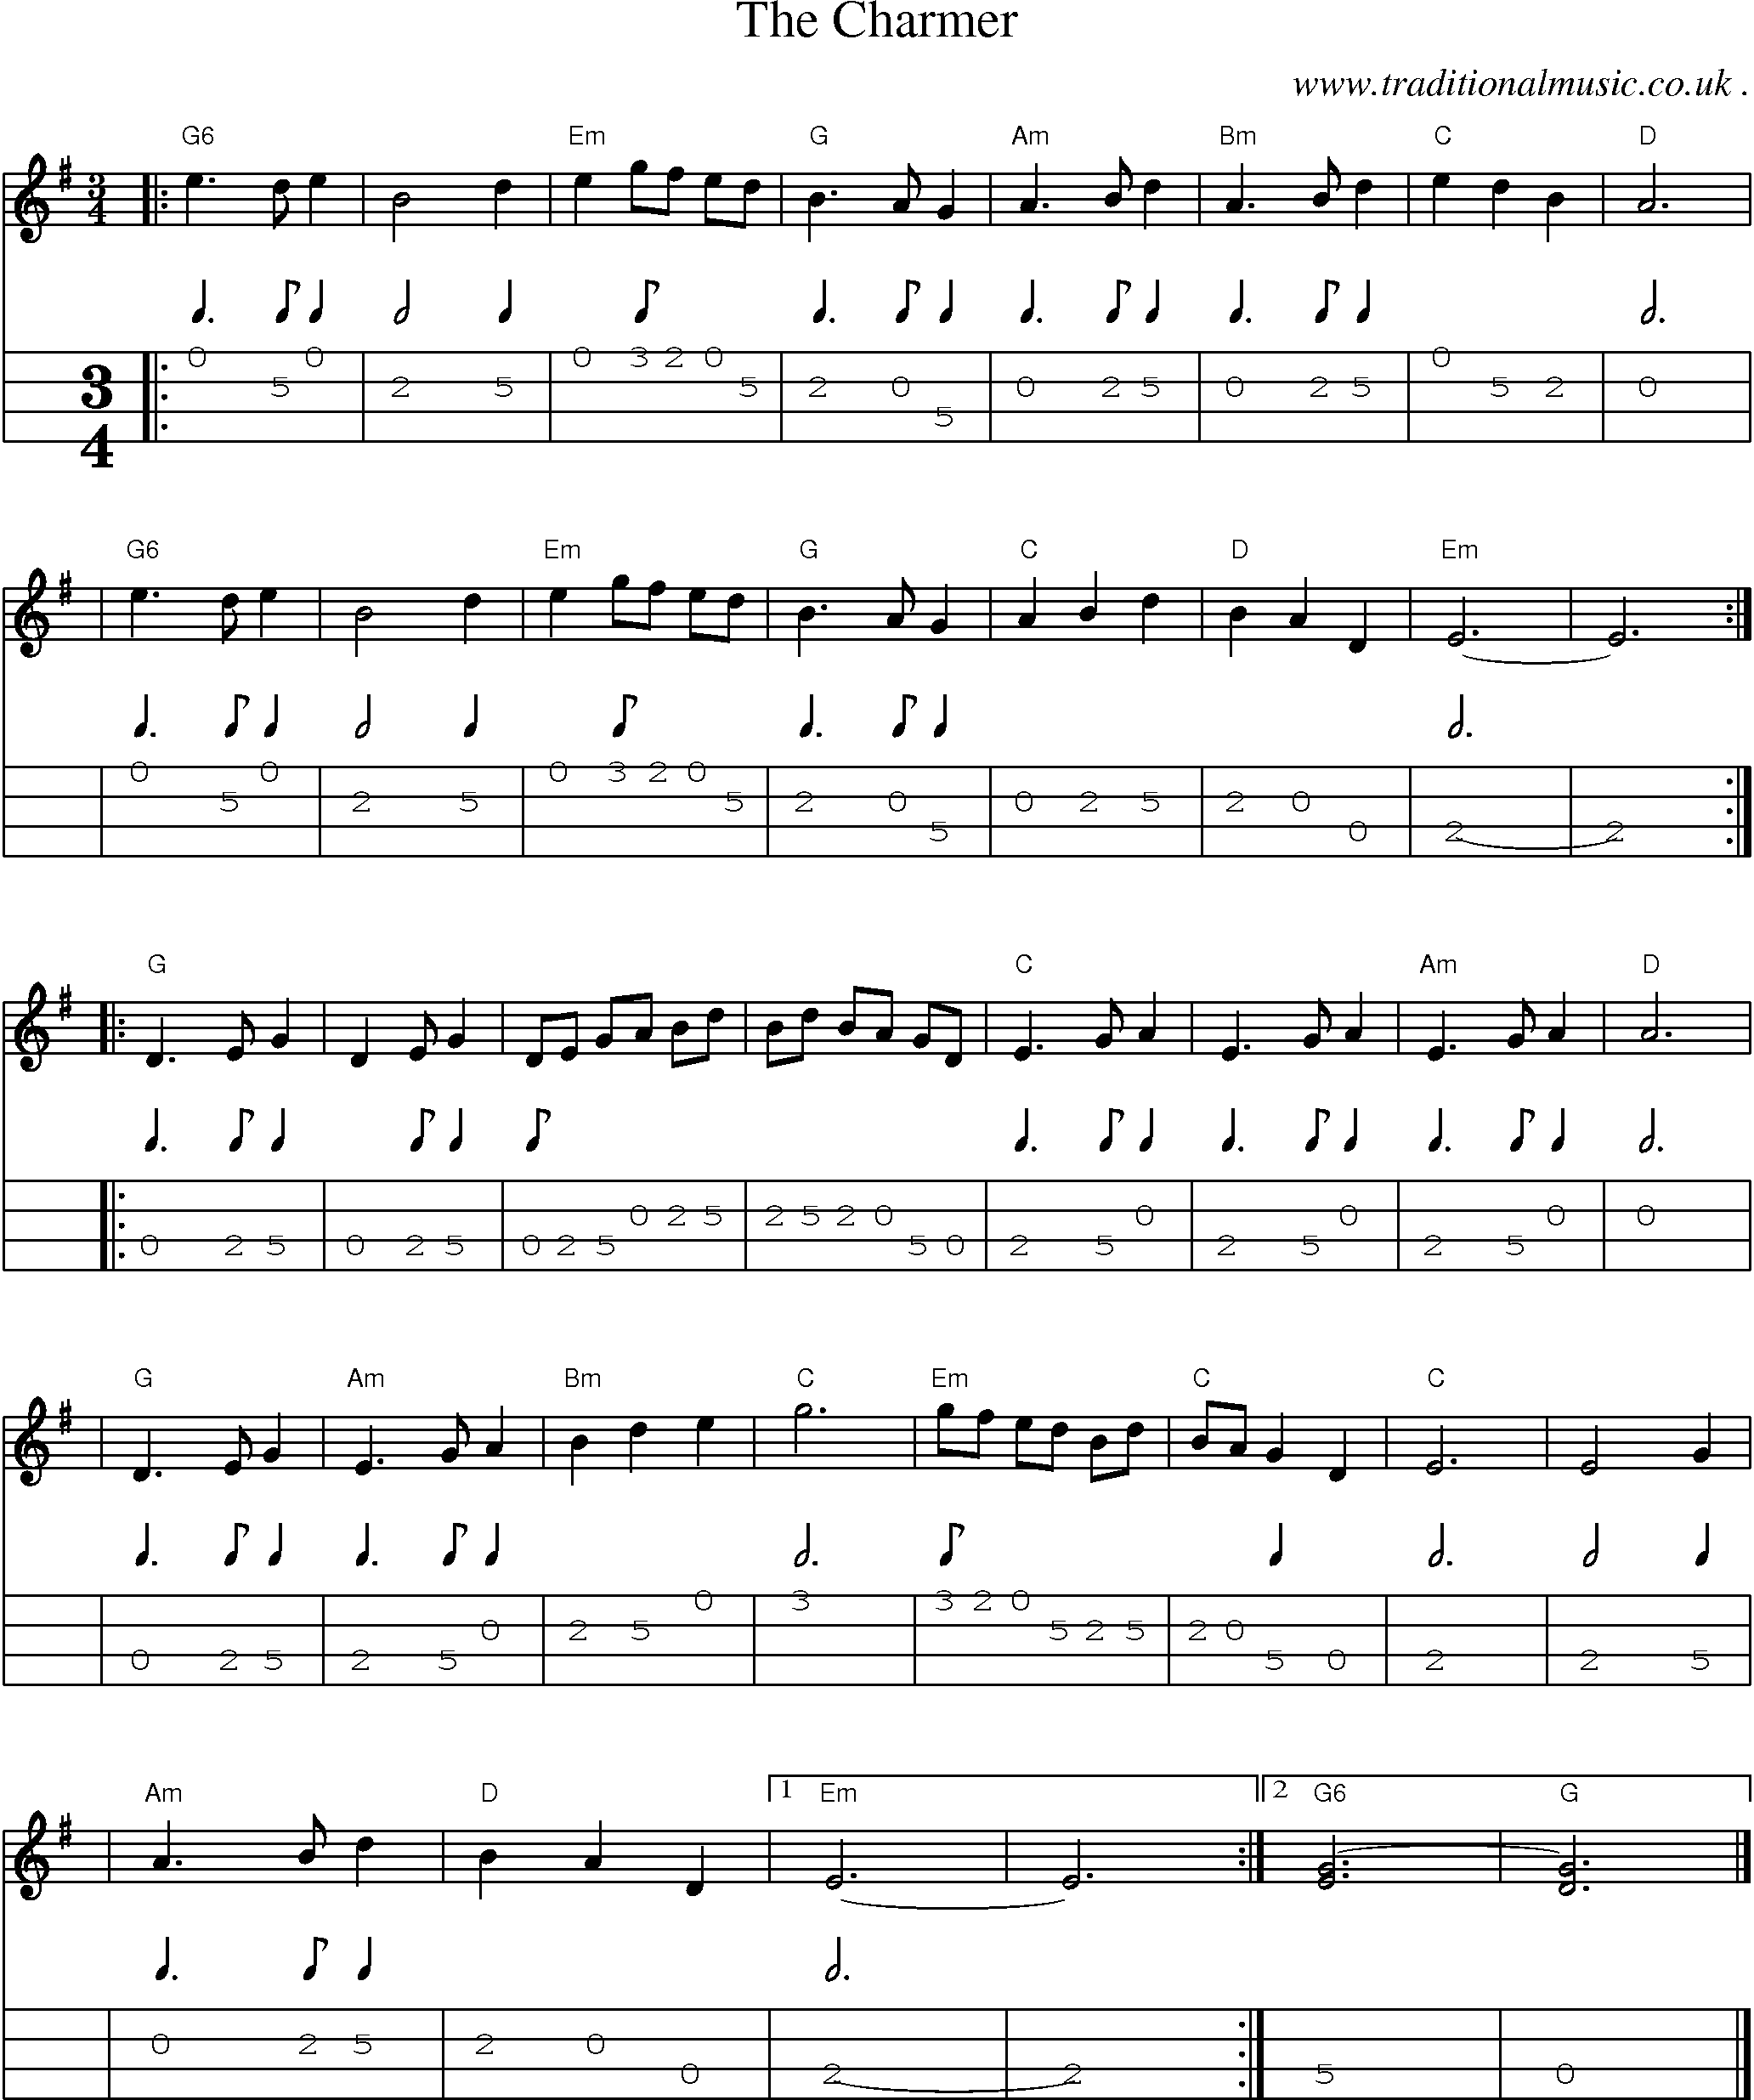 Sheet-music  score, Chords and Mandolin Tabs for The Charmer